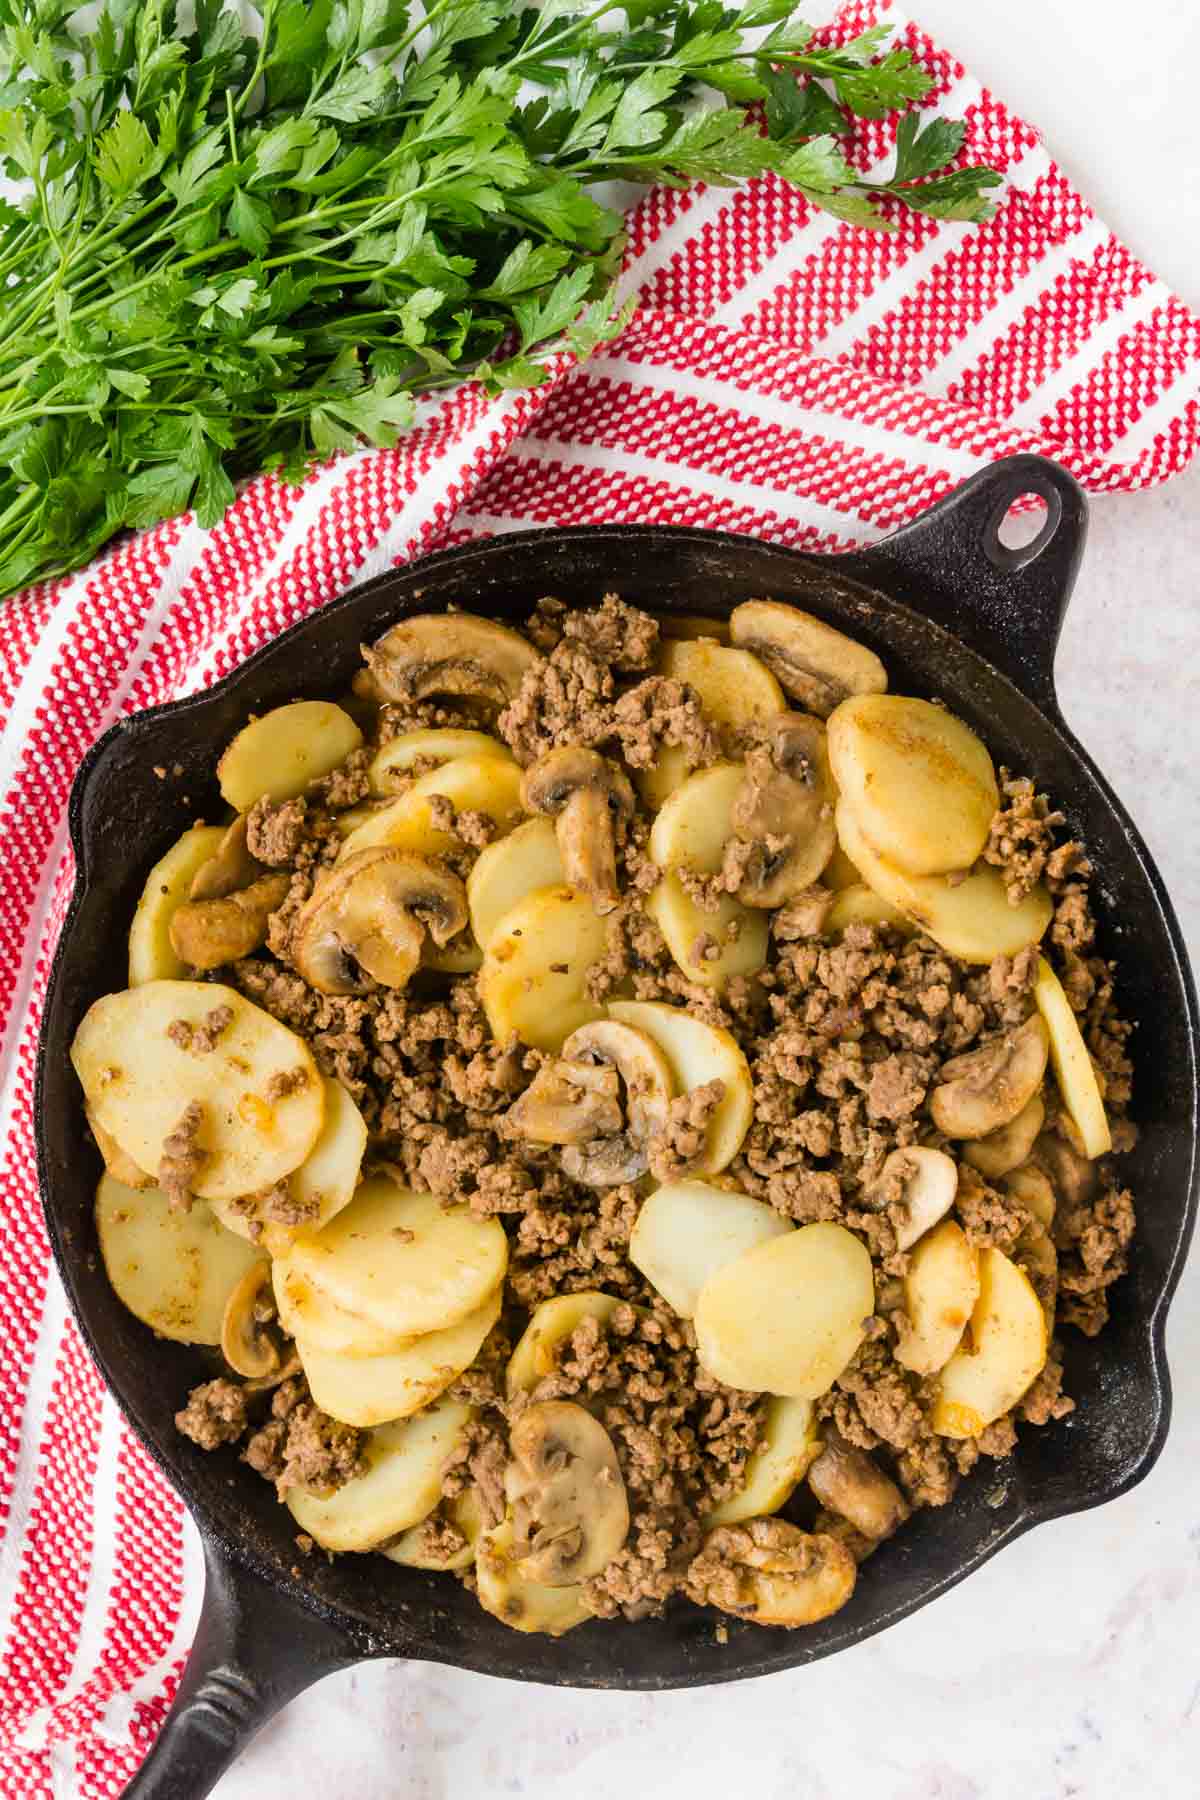 Cooked ground beef with sliced potatoes and mushrooms in a cast iron pan.